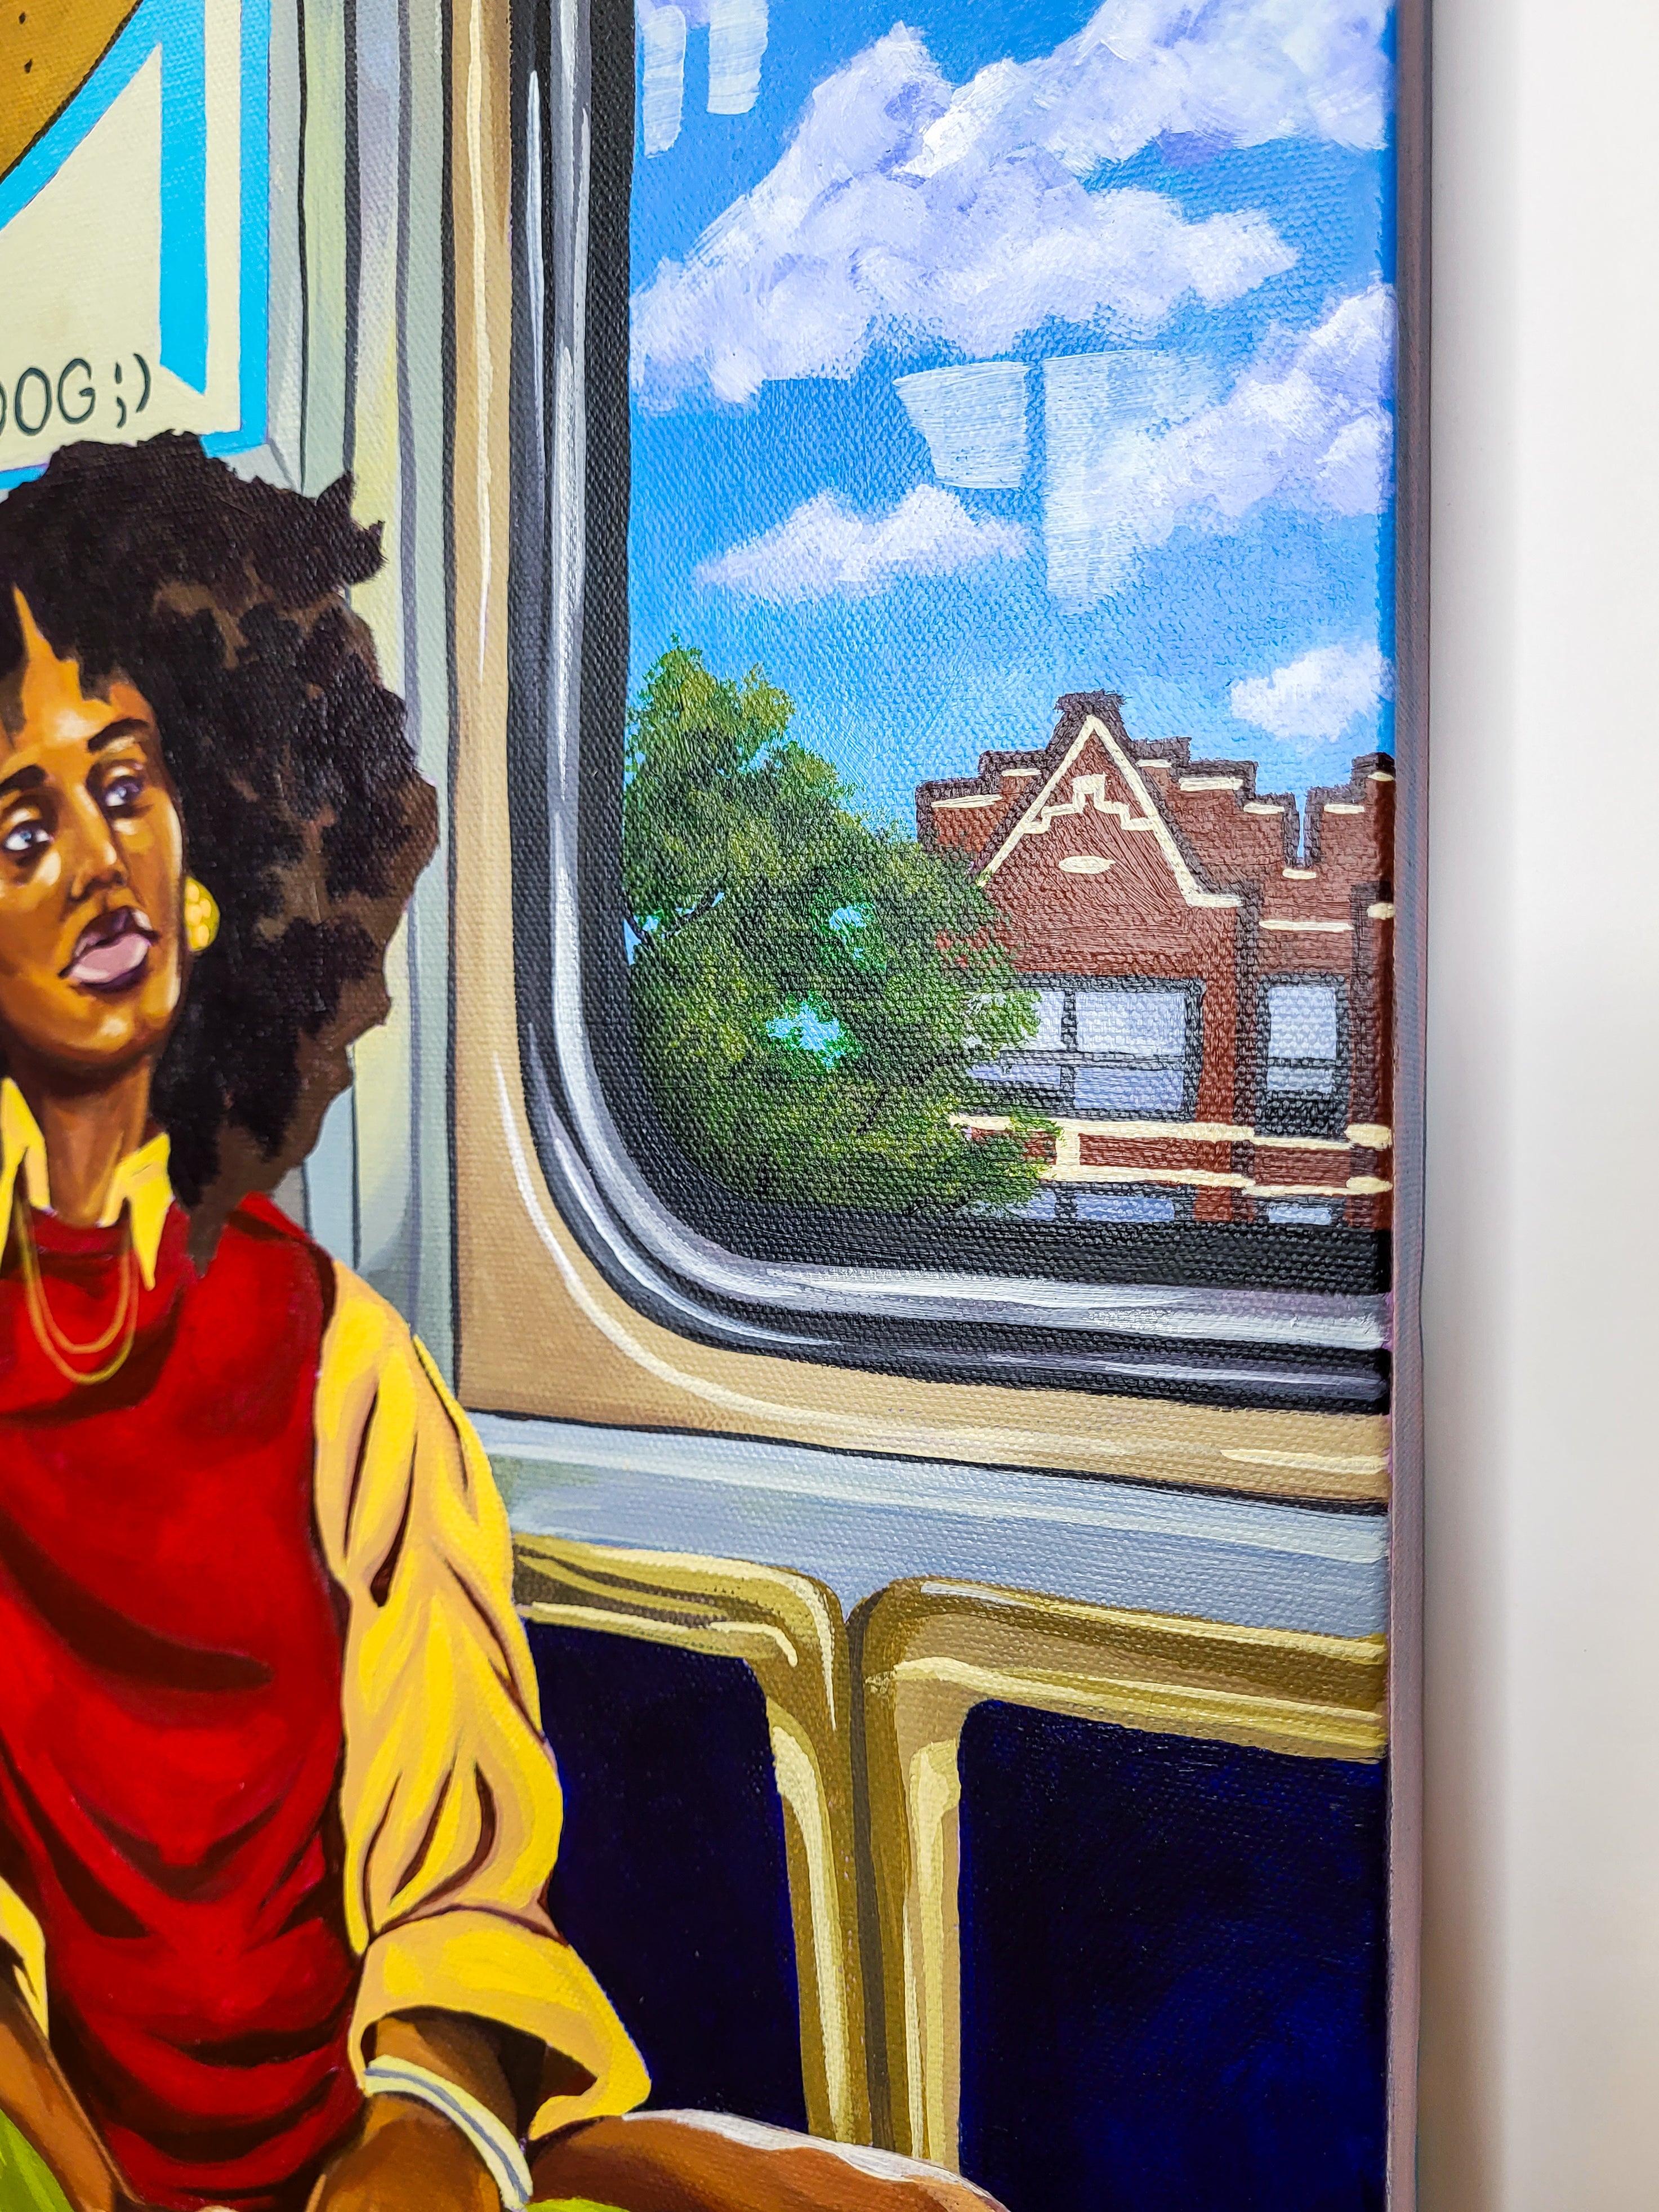 "1(CHI) CAG-ODOG On The L" by Fantasia Ariel